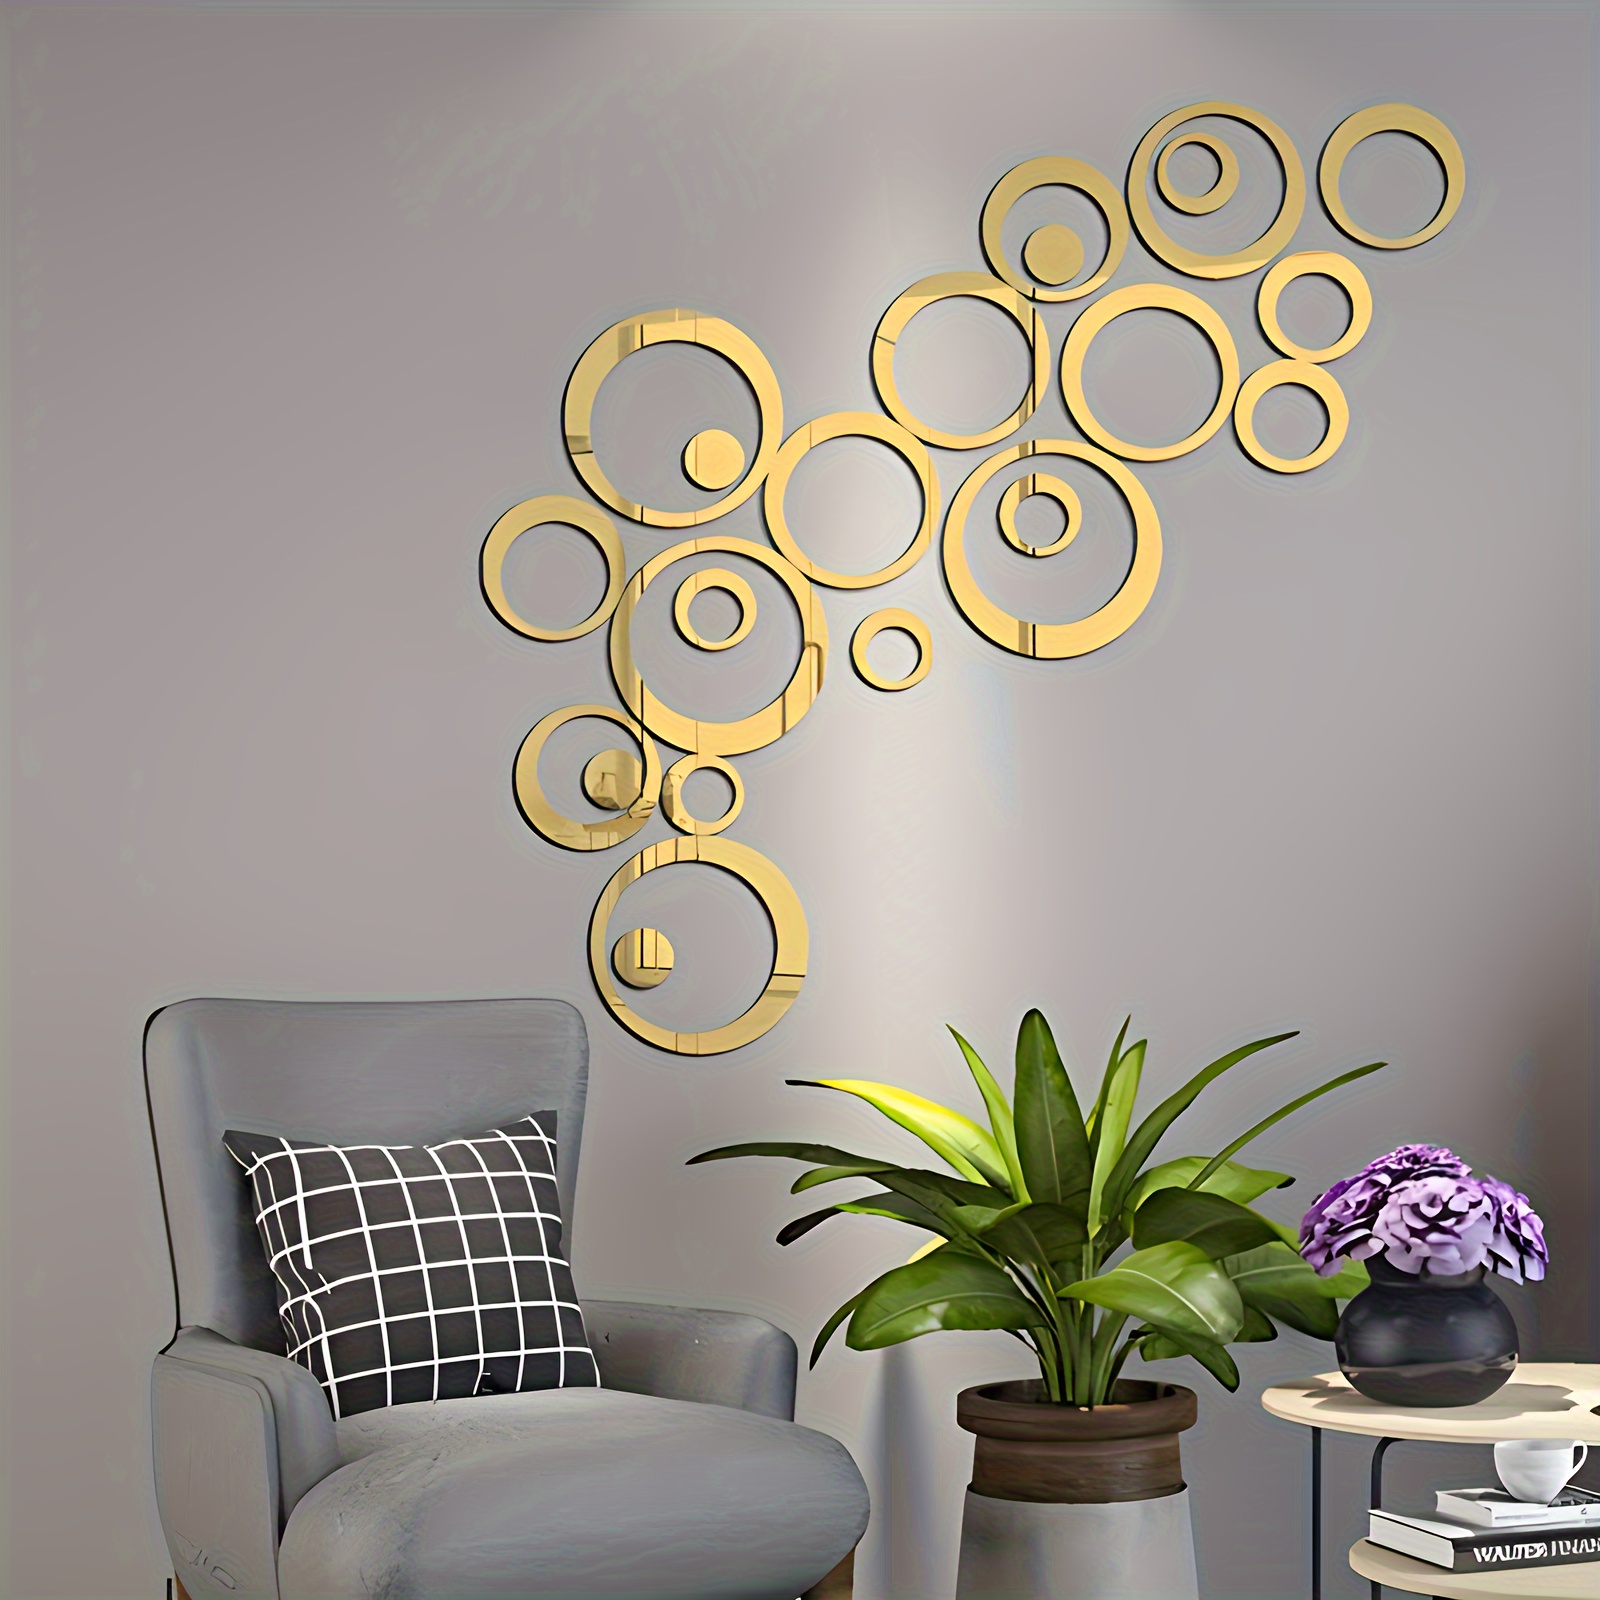 

24 Pieces Acrylic Mirror Wall Stickers, 3d Removable Self-adhesive Circle Crystal Decor For Home Living Room Bedroom